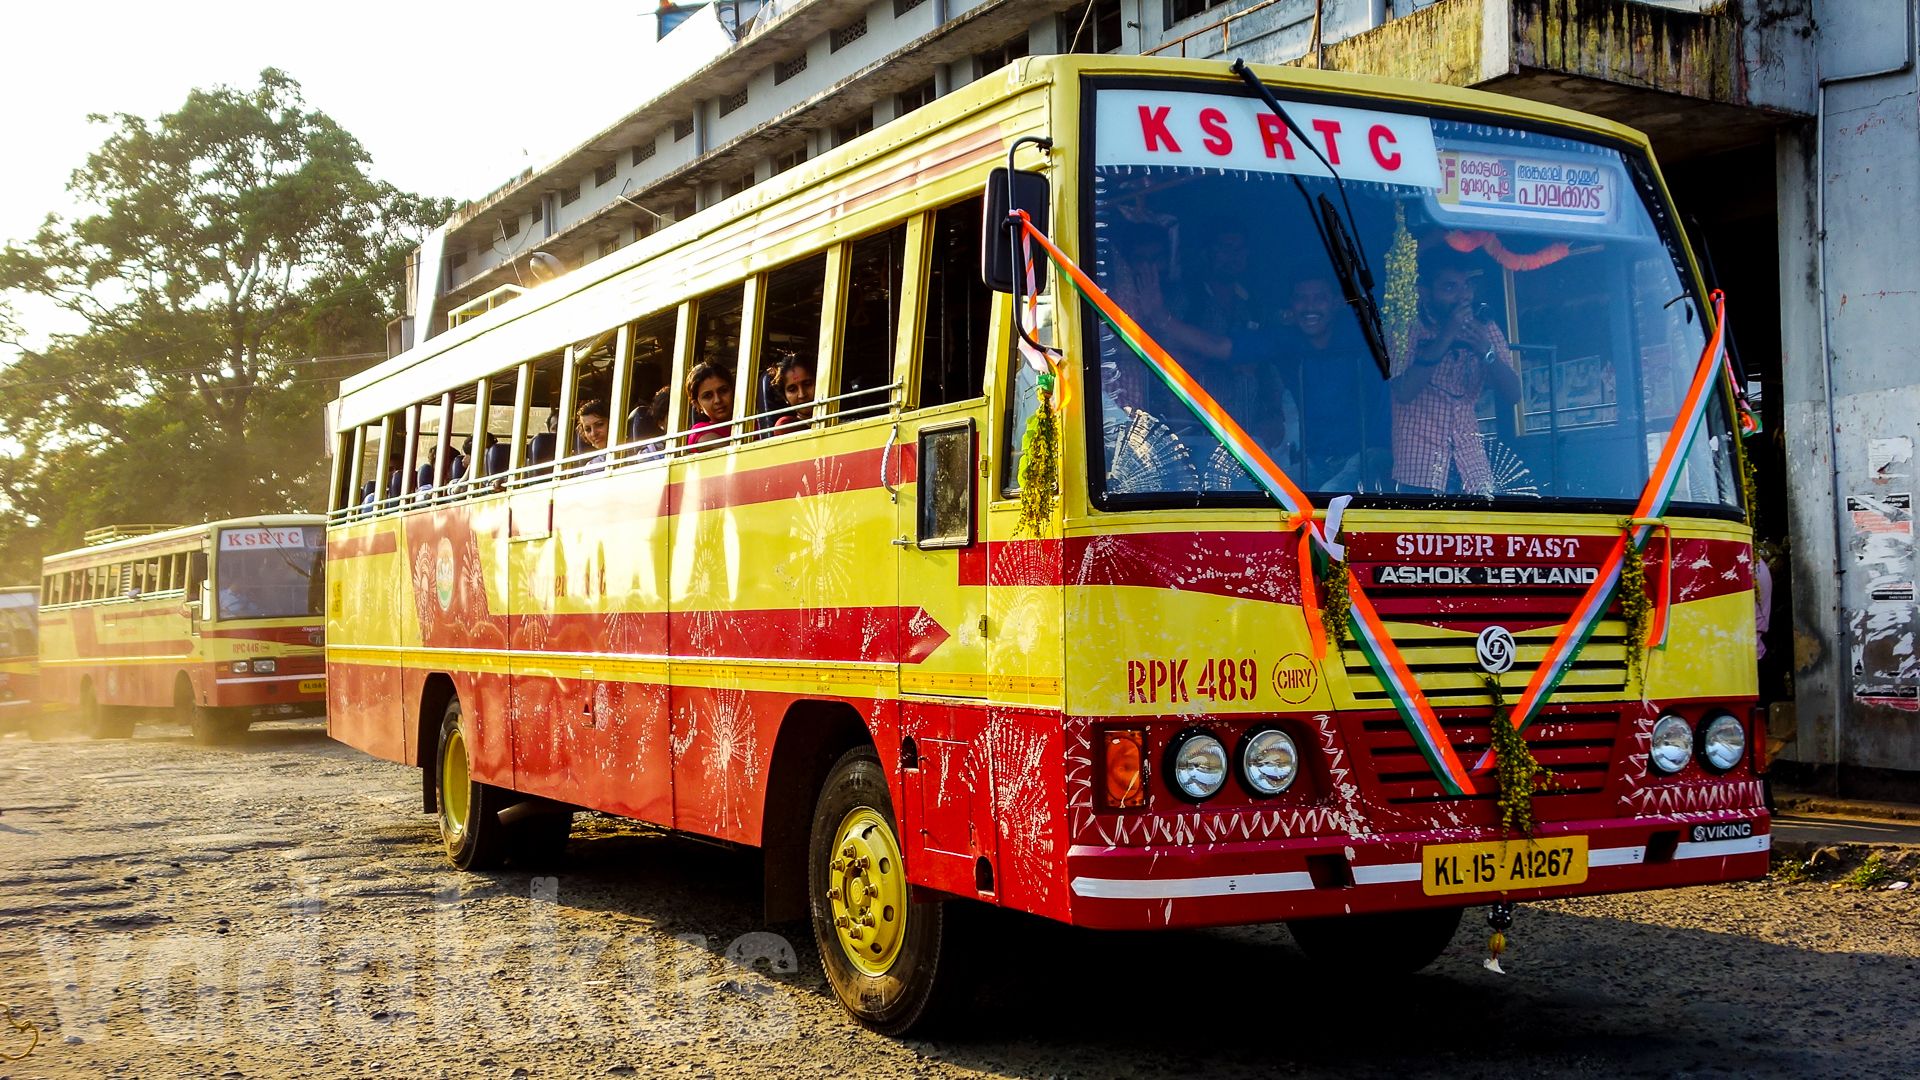 Brand new KSRTC Superfast bus on its First Run